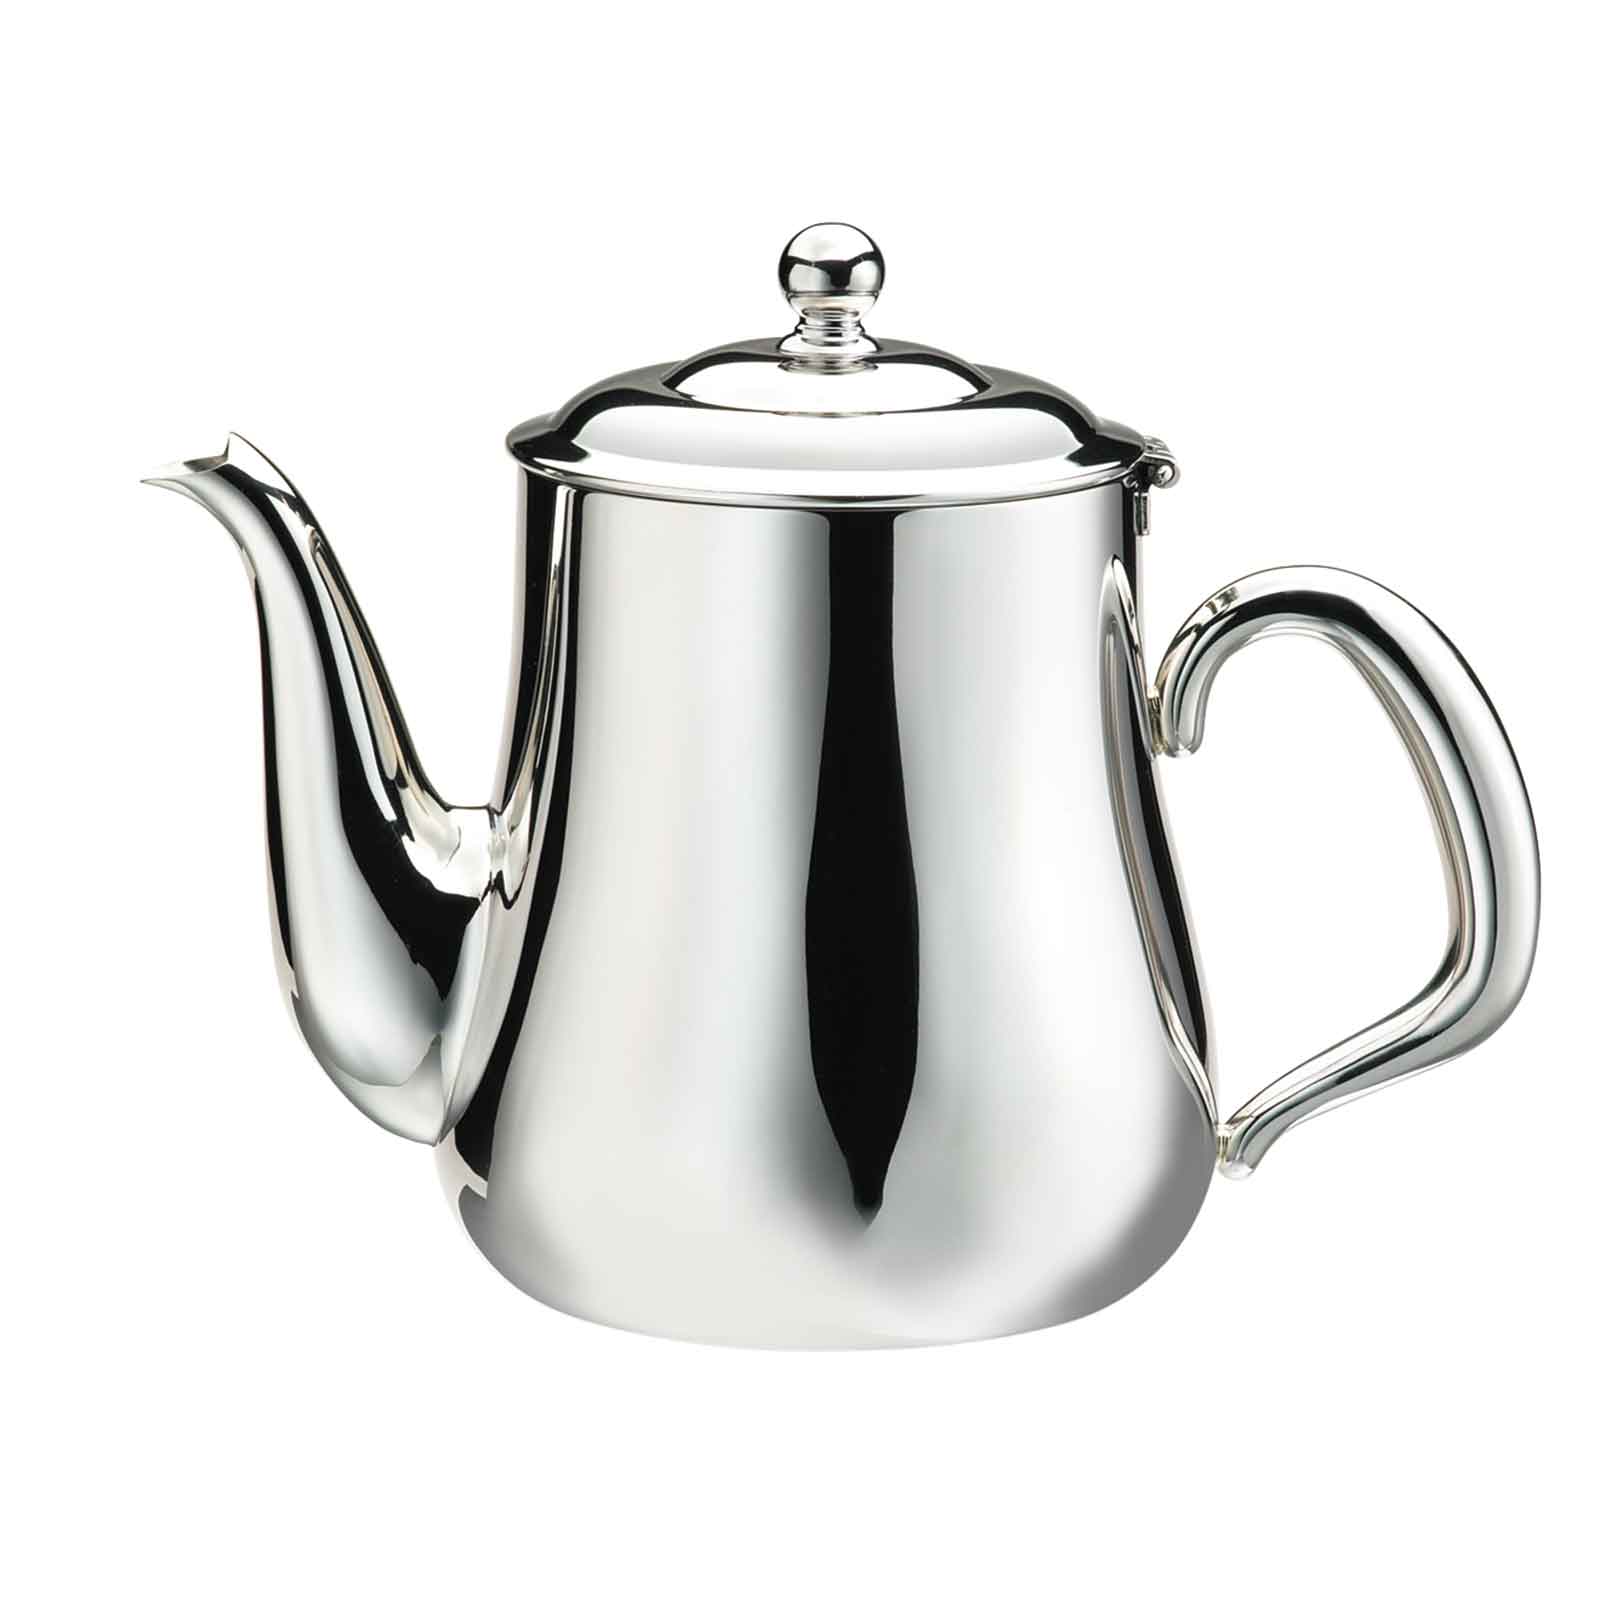 Walco Stainless CX519 Coffee Pot/Teapot, Stainless Steel, Holloware